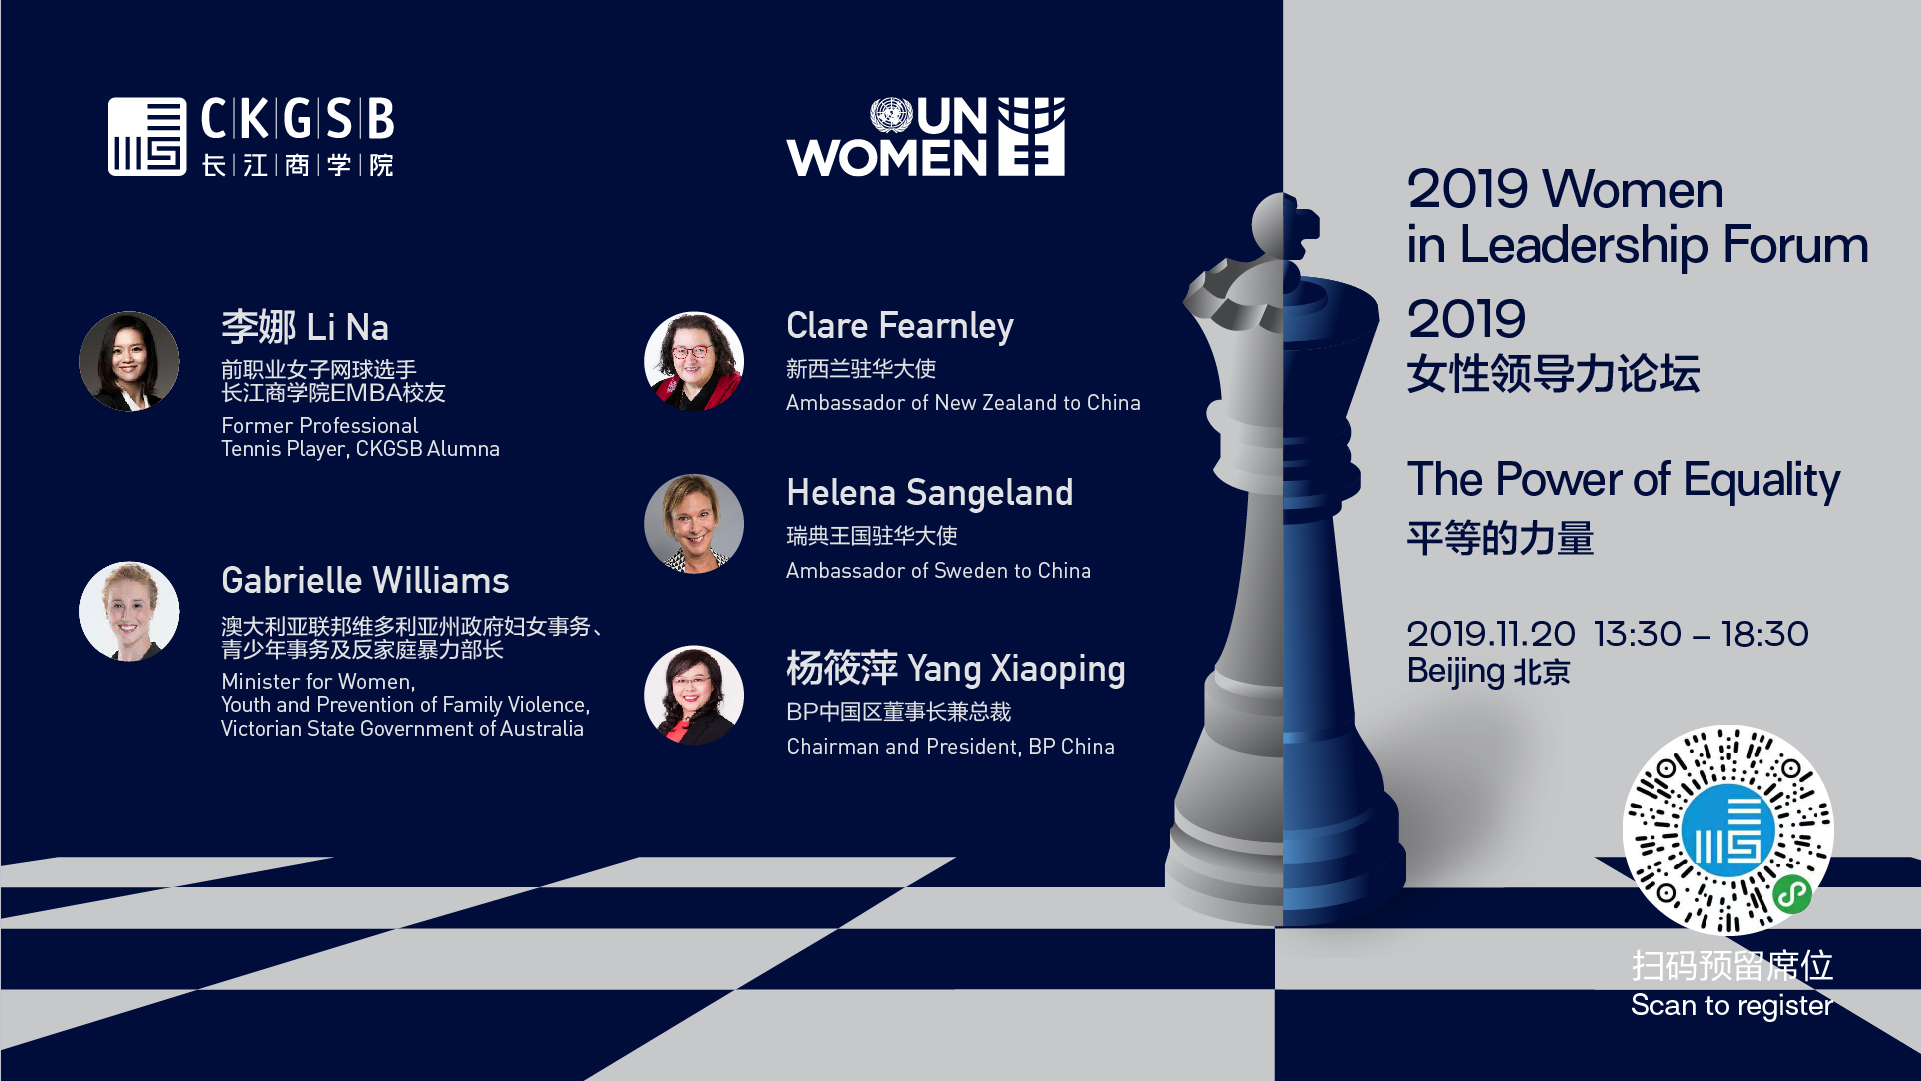 2019 Women in Leadership Forum – The Power of Equality 2019 女性领导力论坛 – 平等的力量